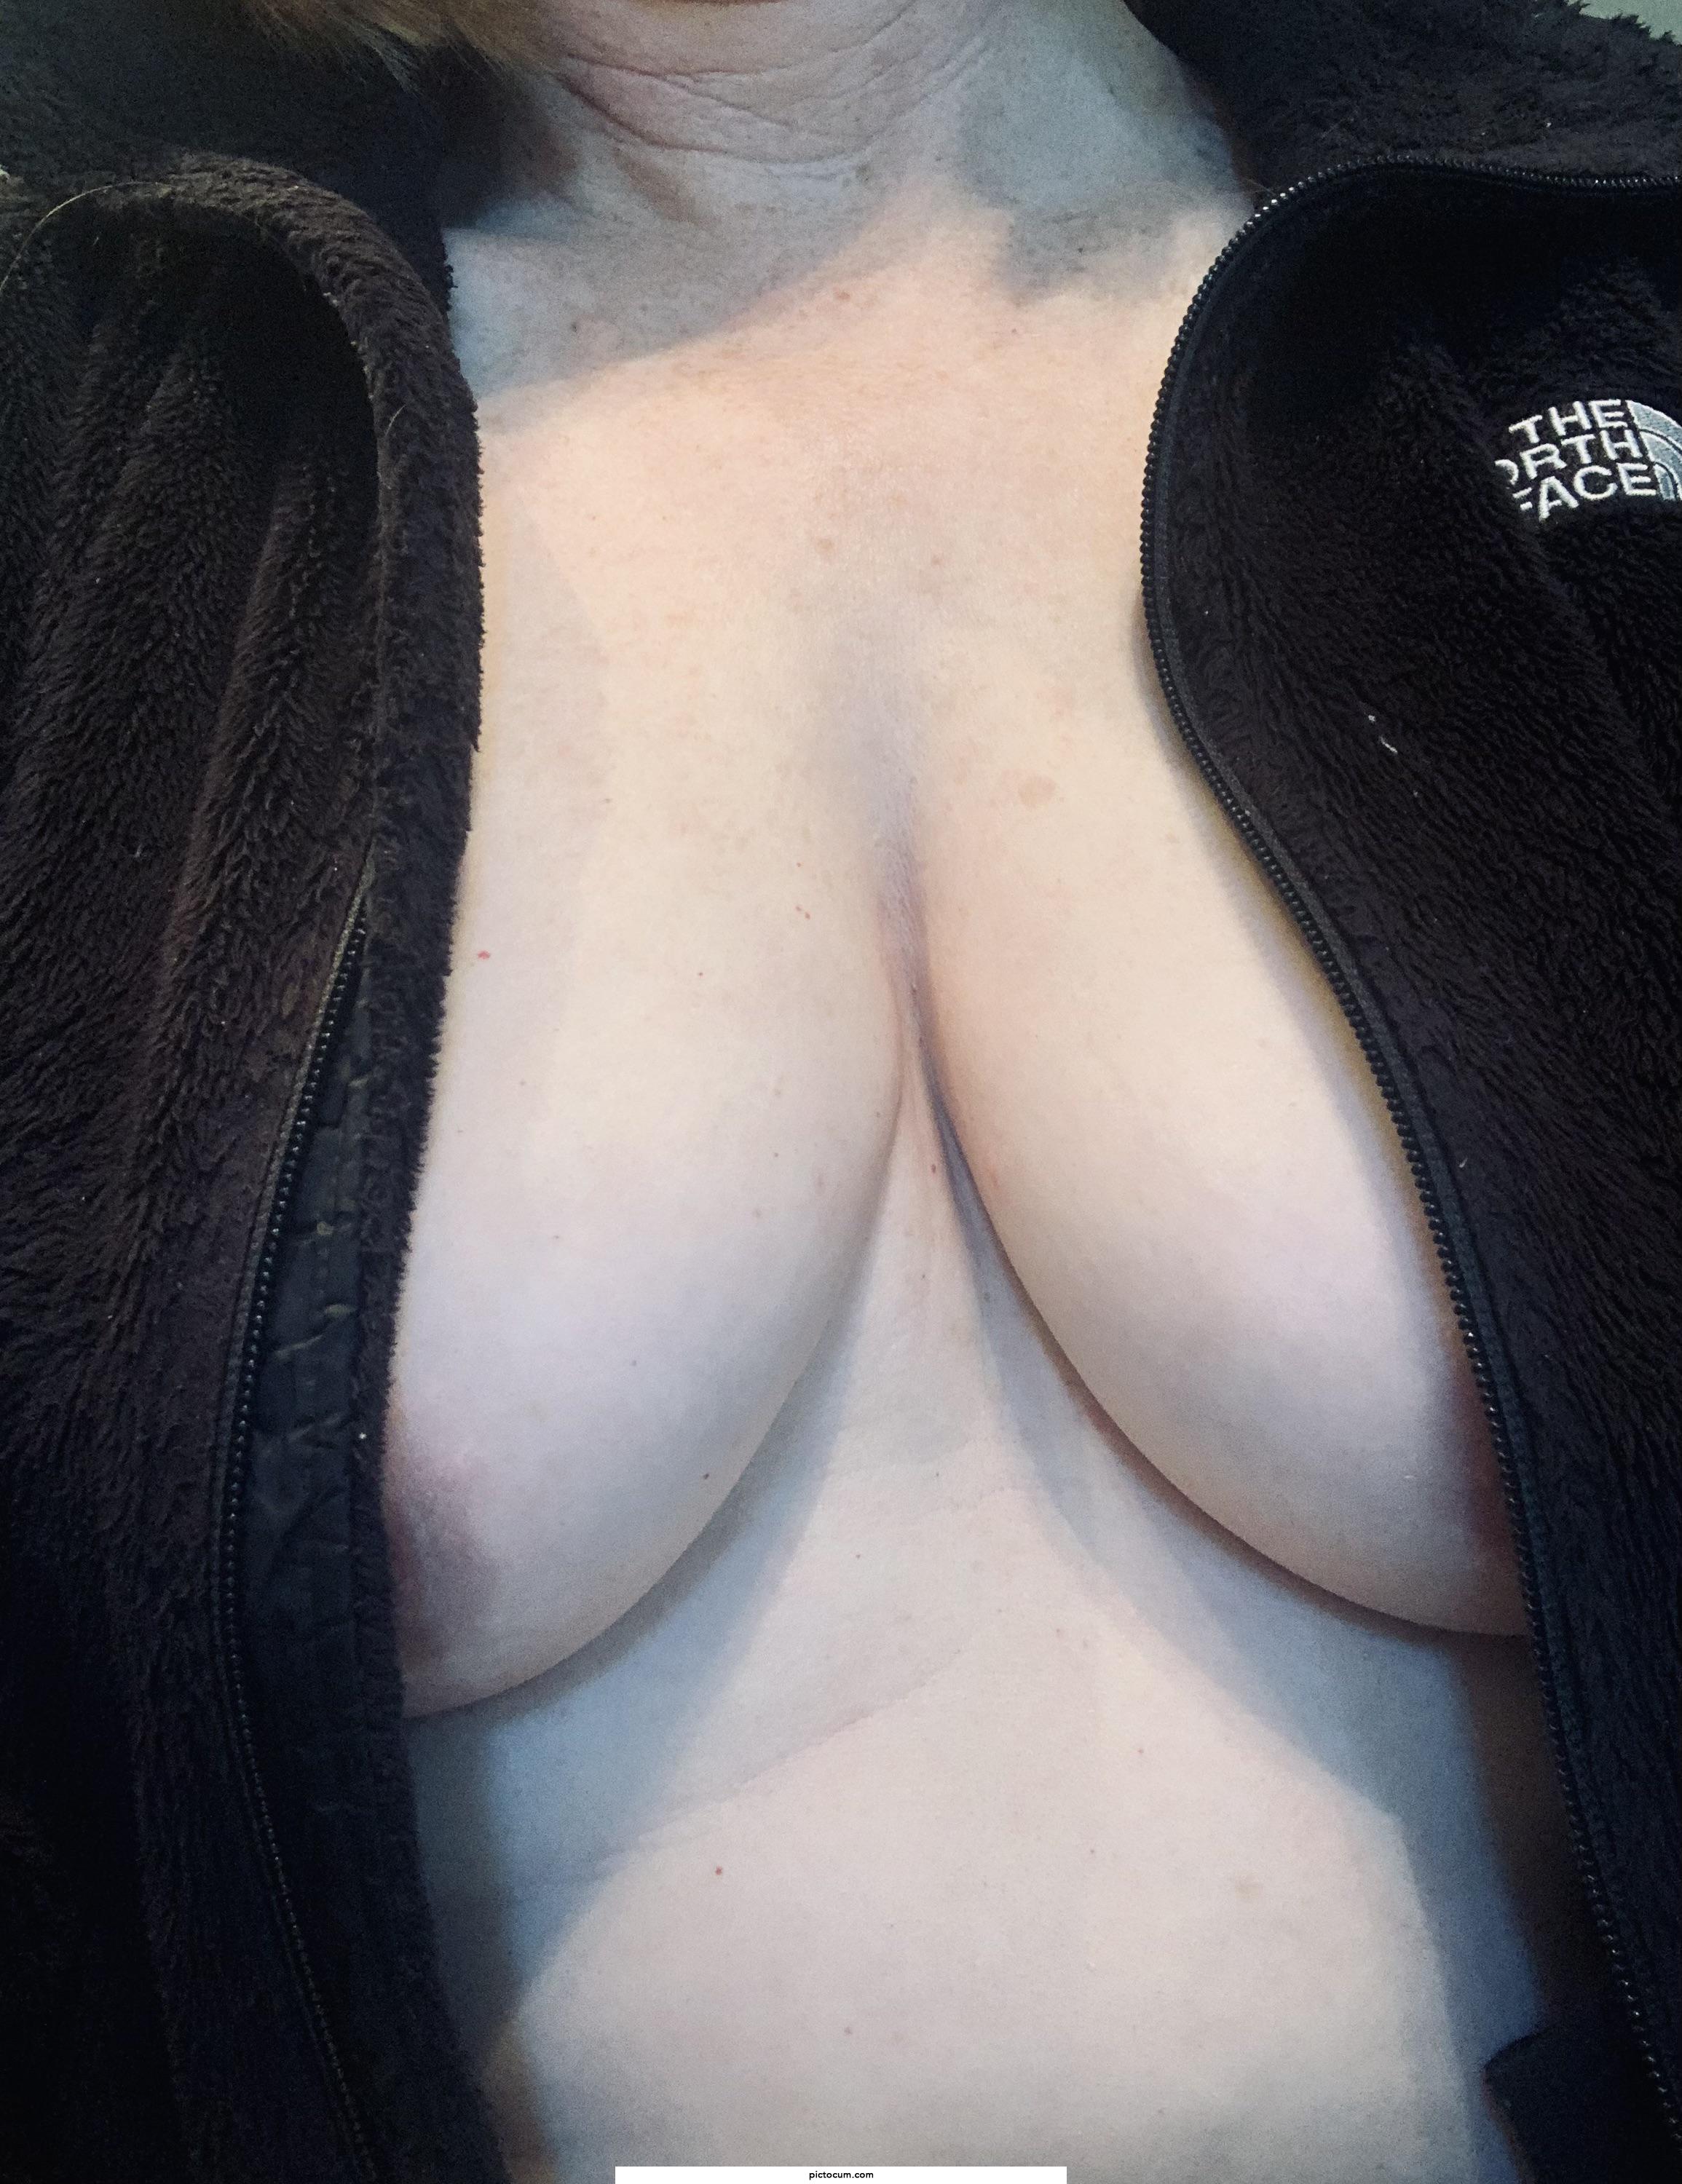 It’s cold today so keeping the nipples warm!